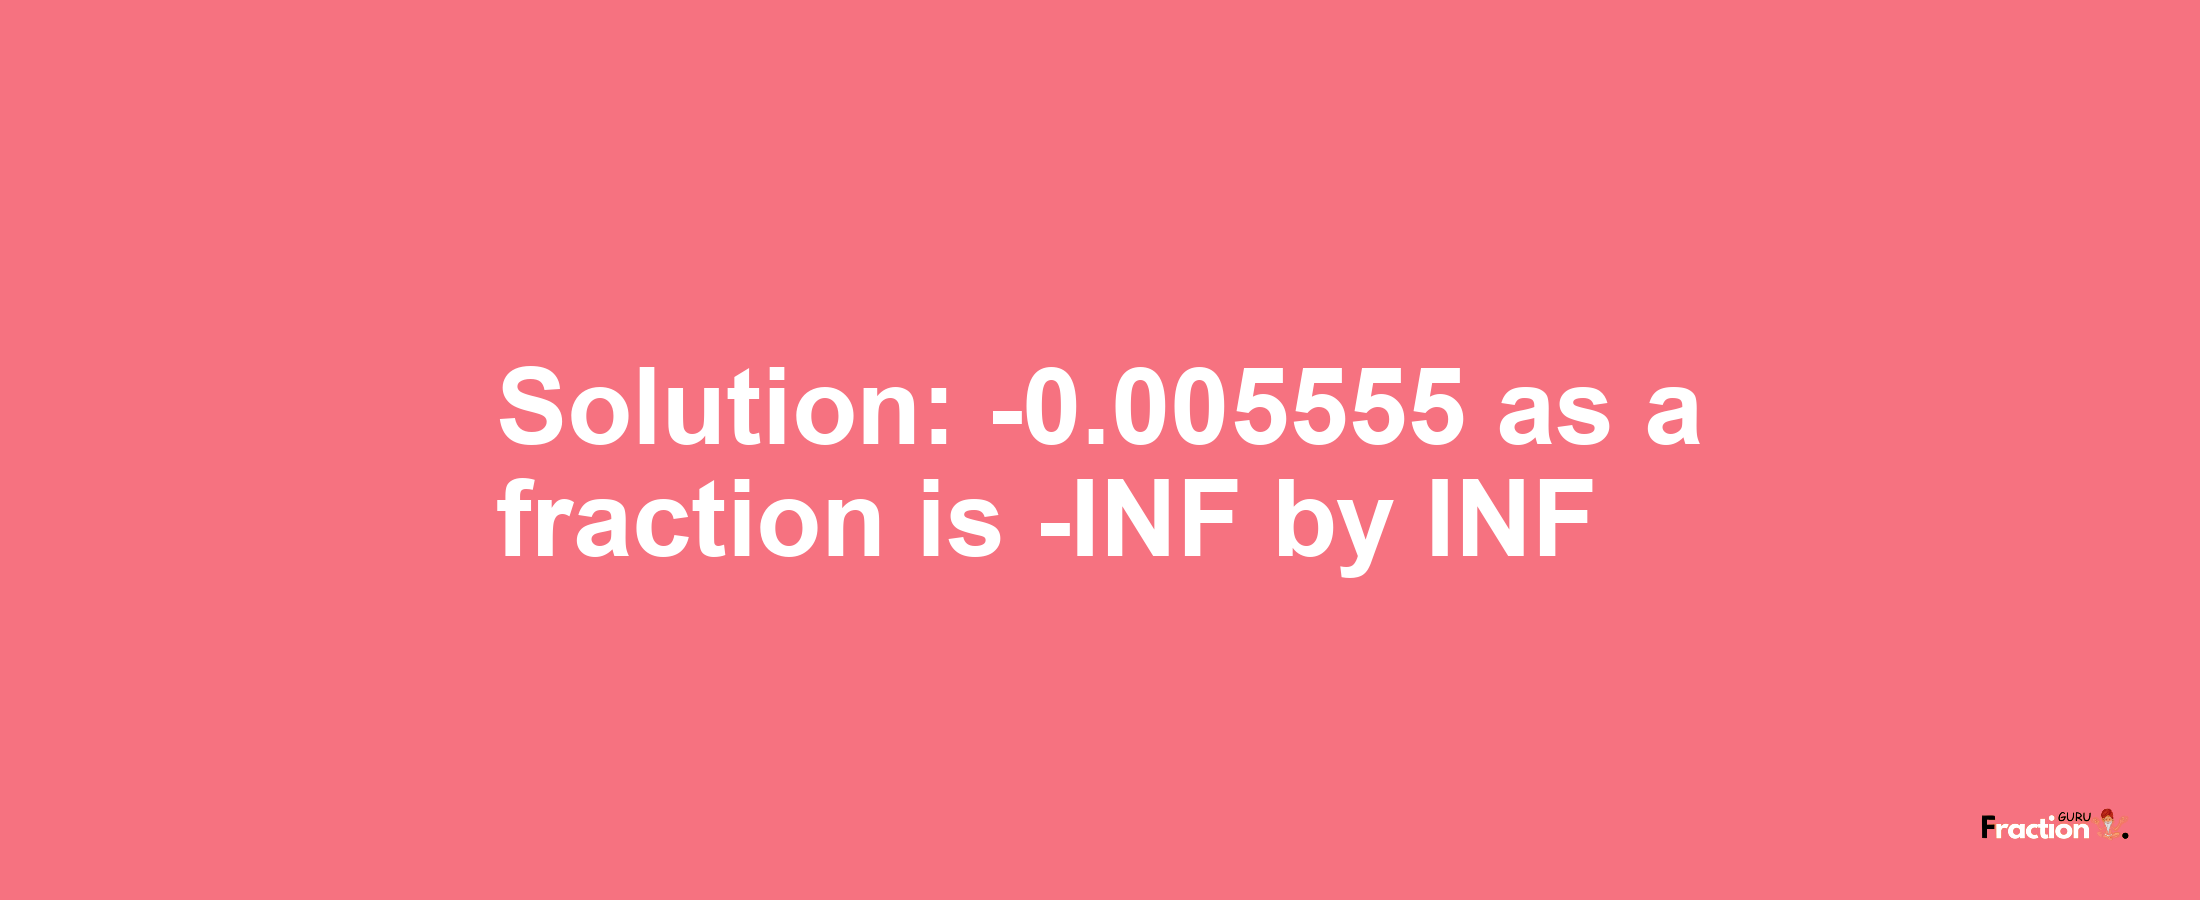 Solution:-0.005555 as a fraction is -INF/INF